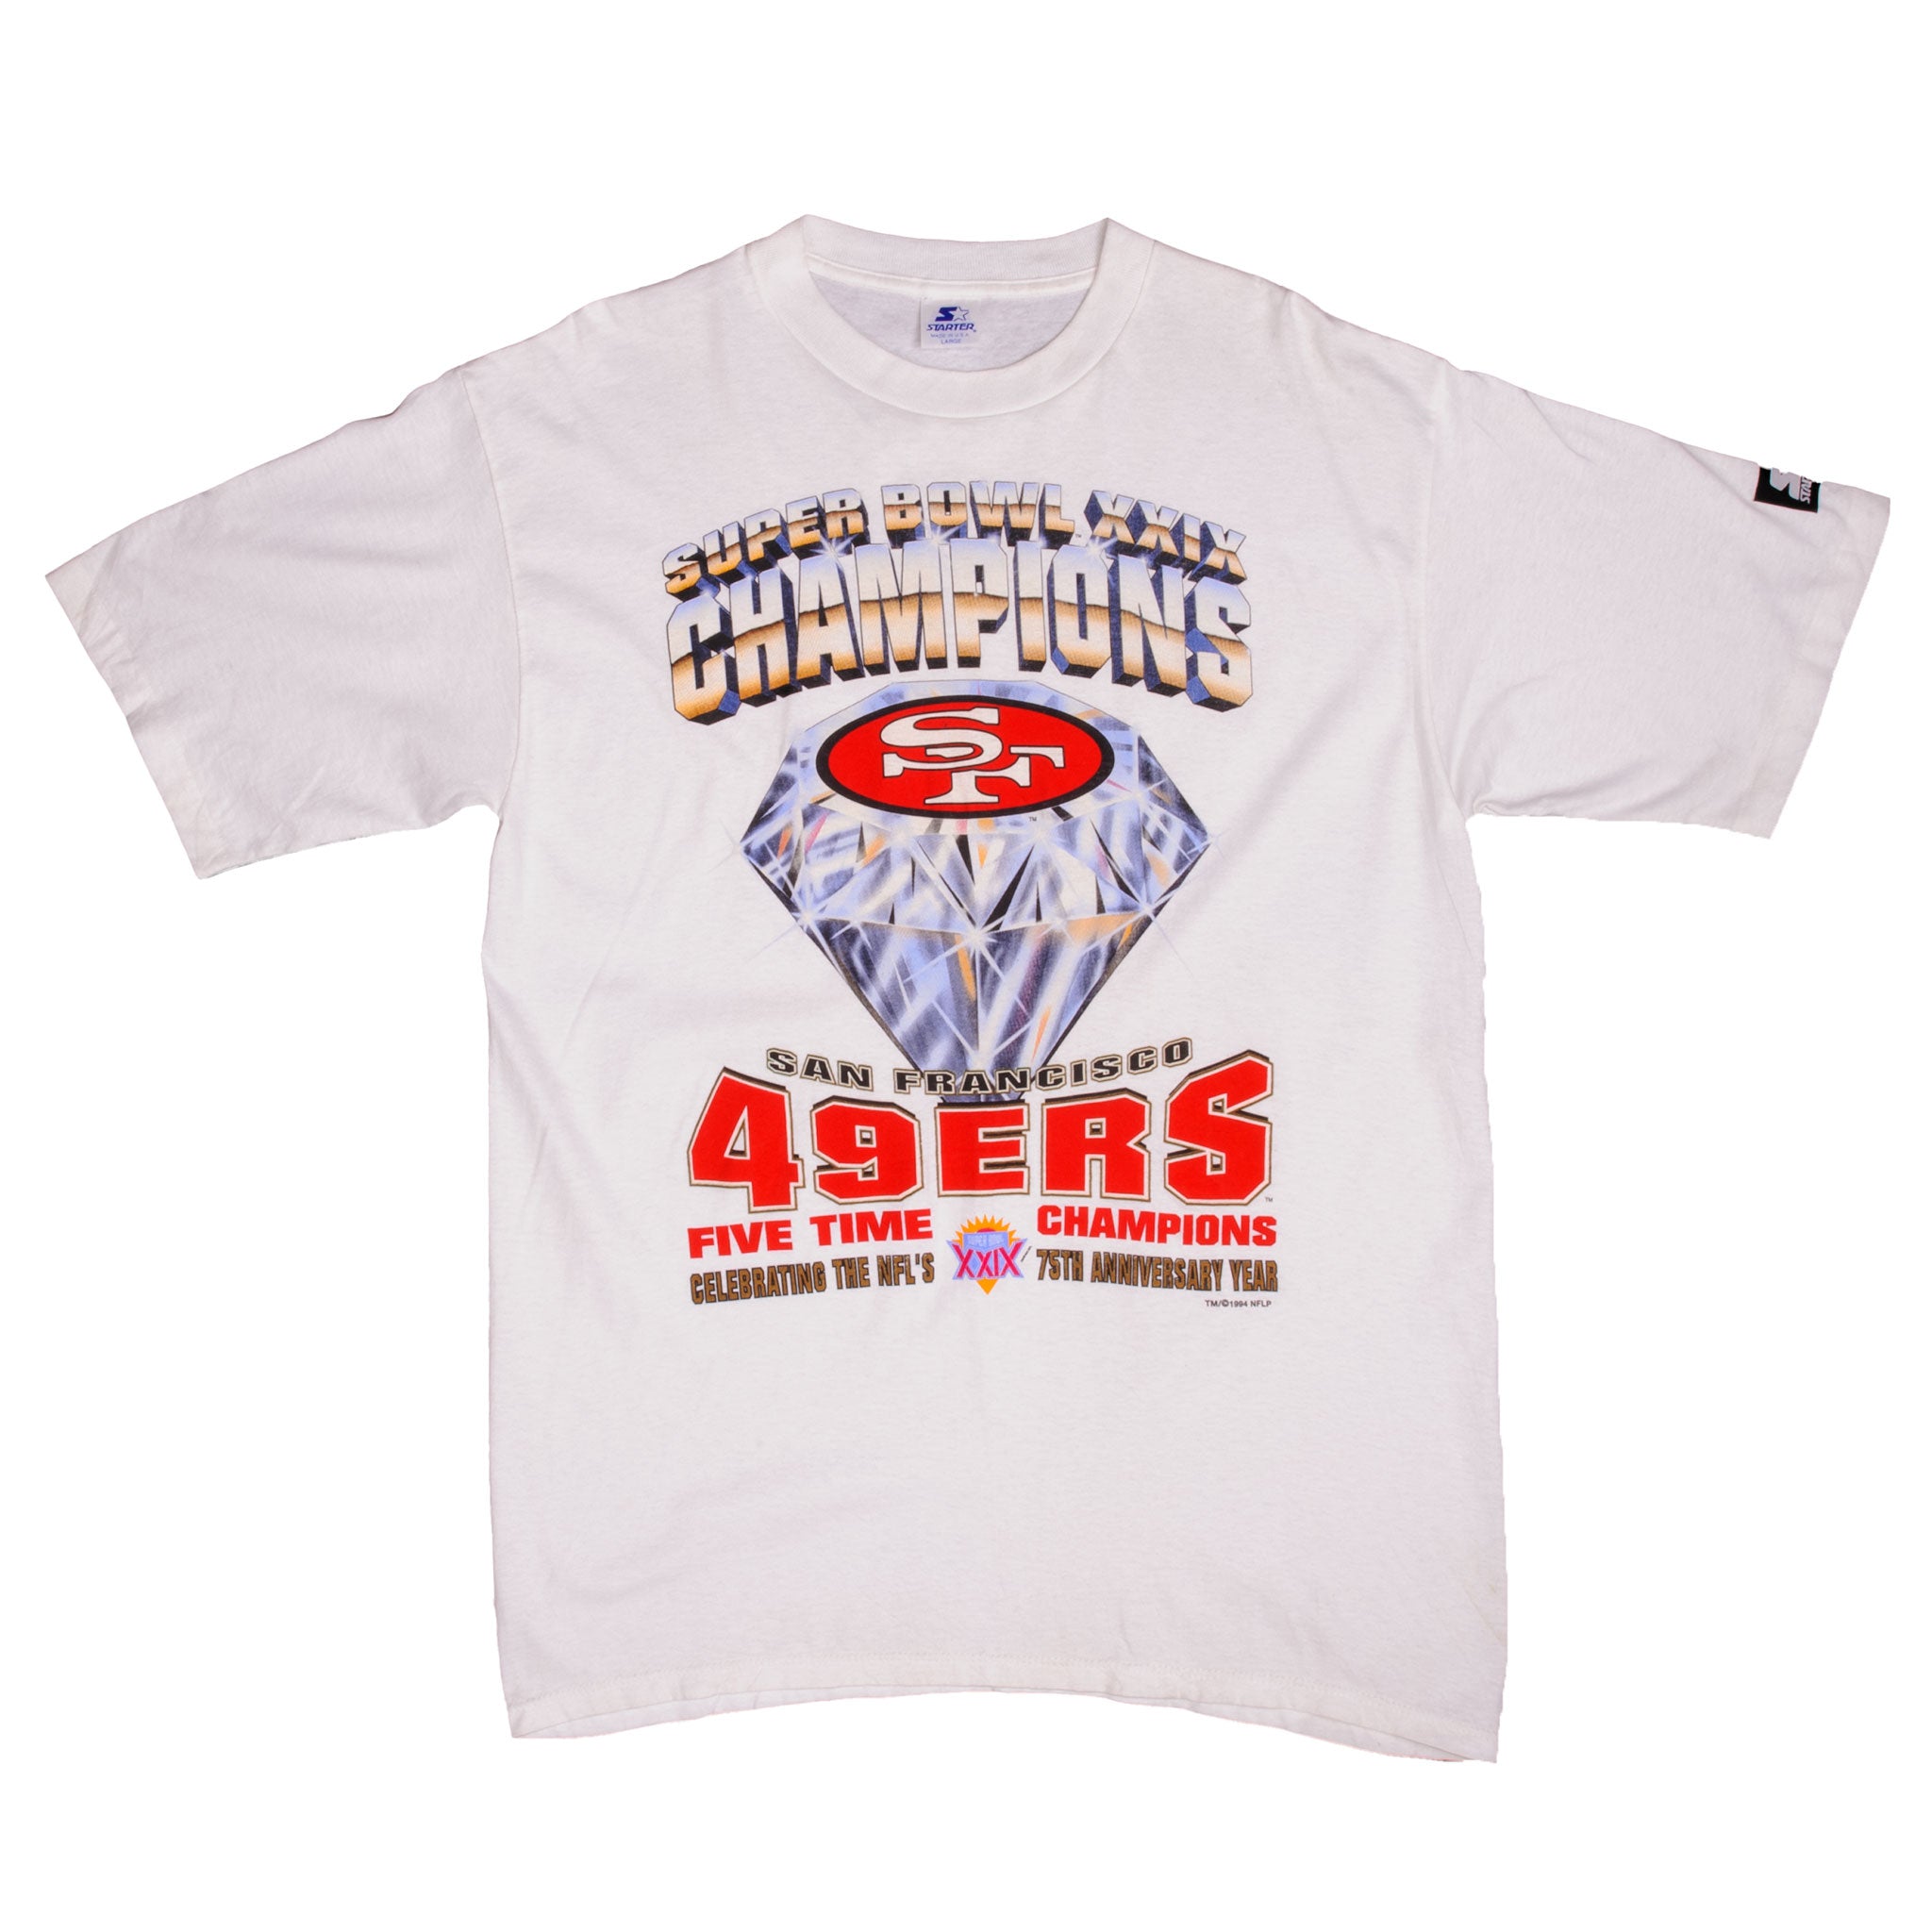 Sports / College Vintage NFL San Francisco 49ers 5 Times Champions Tee Shirt 1994 Large Made USA